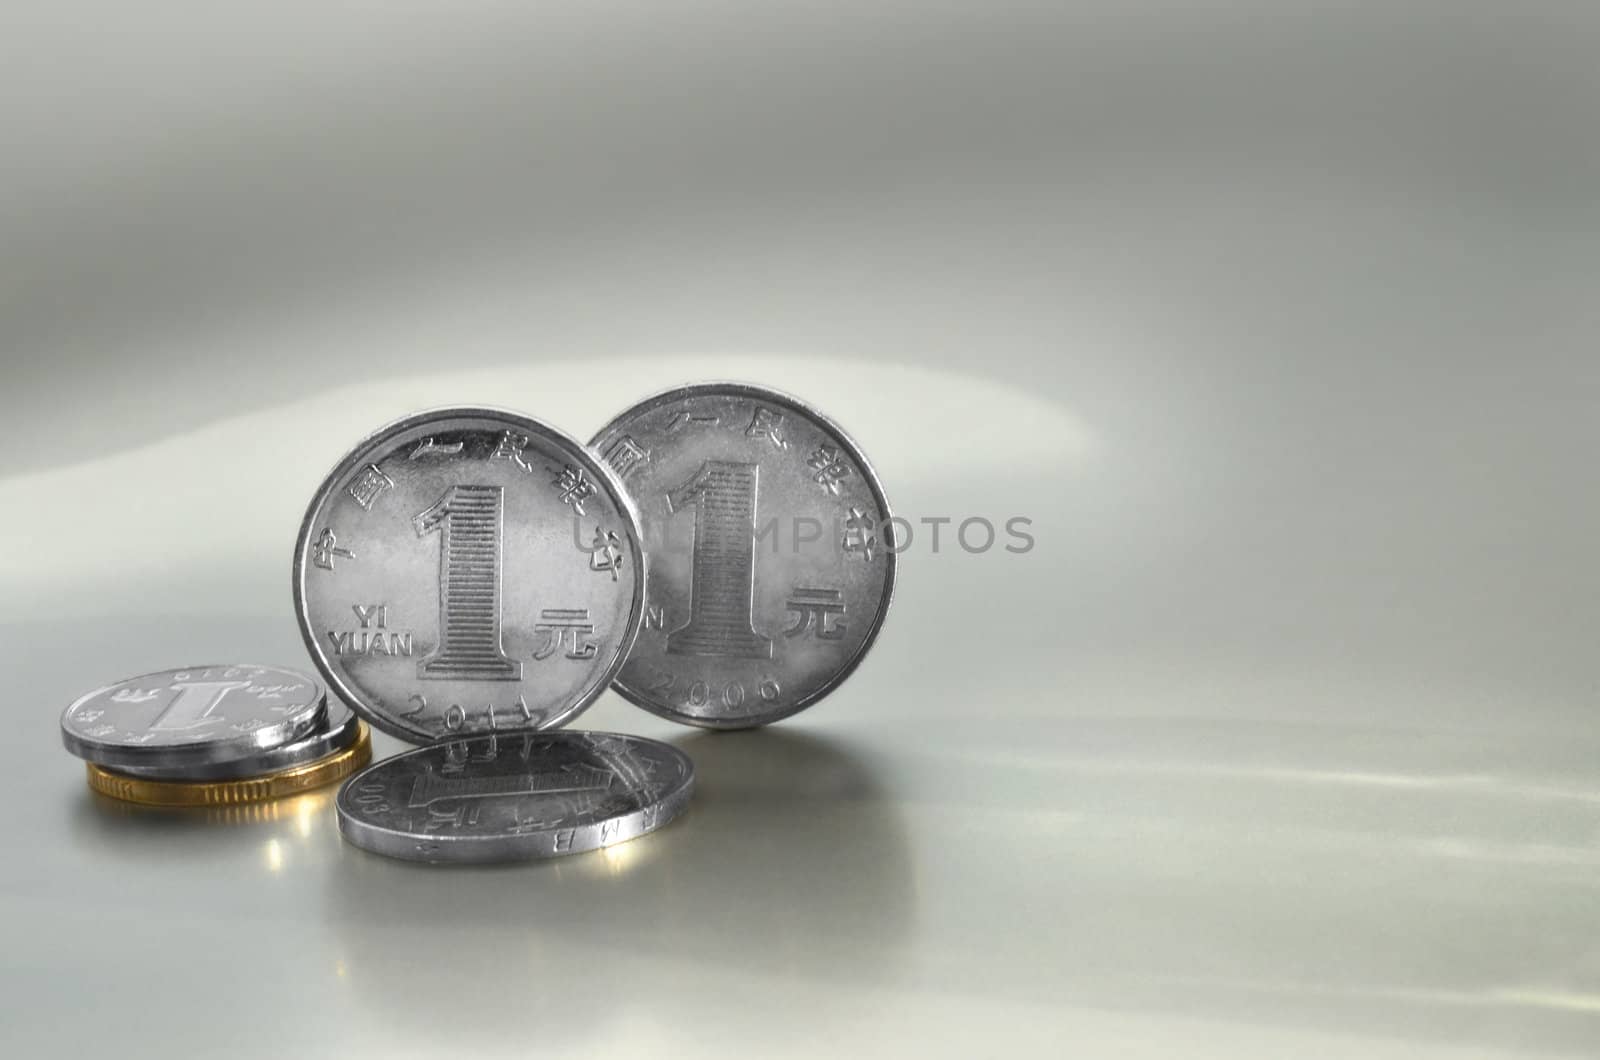 Few chinese coins on light background